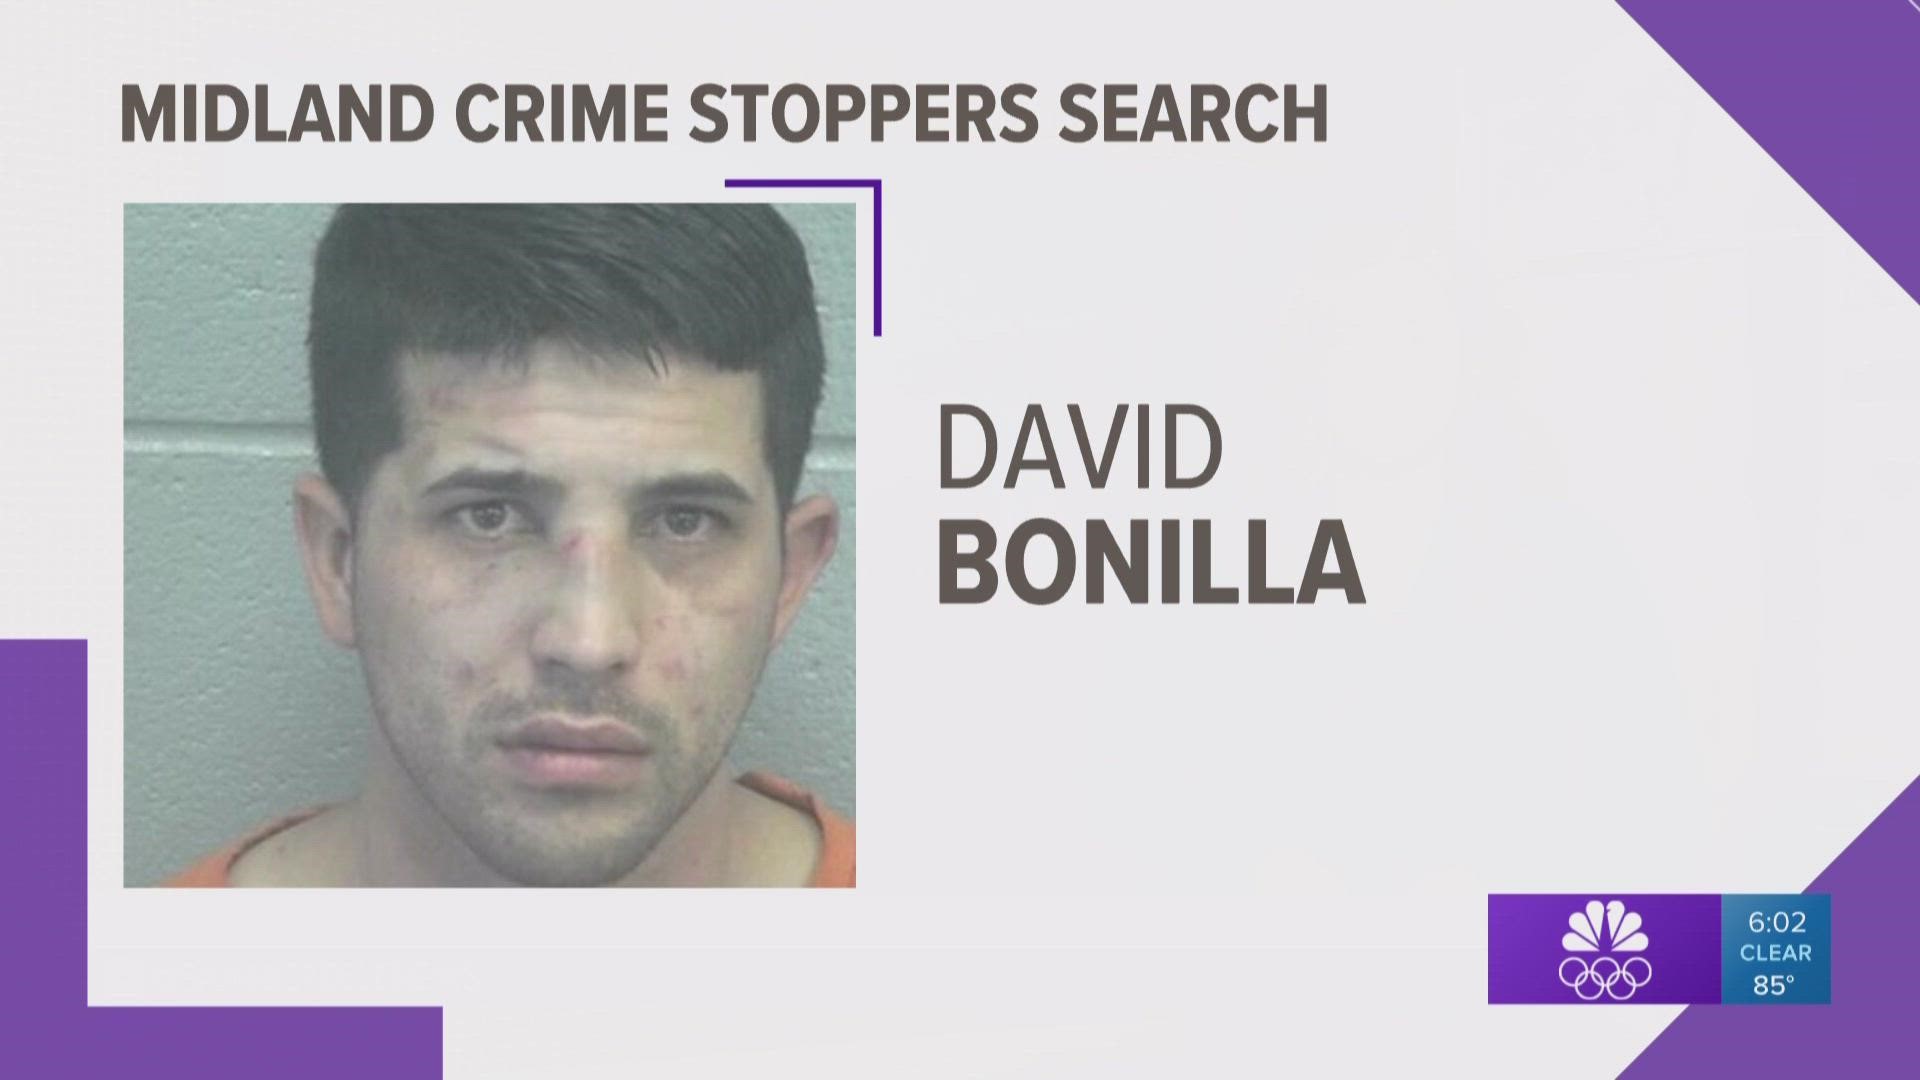 32-year-old David Bonilla has been charged with Aggravated Sexual Assault of a Child.